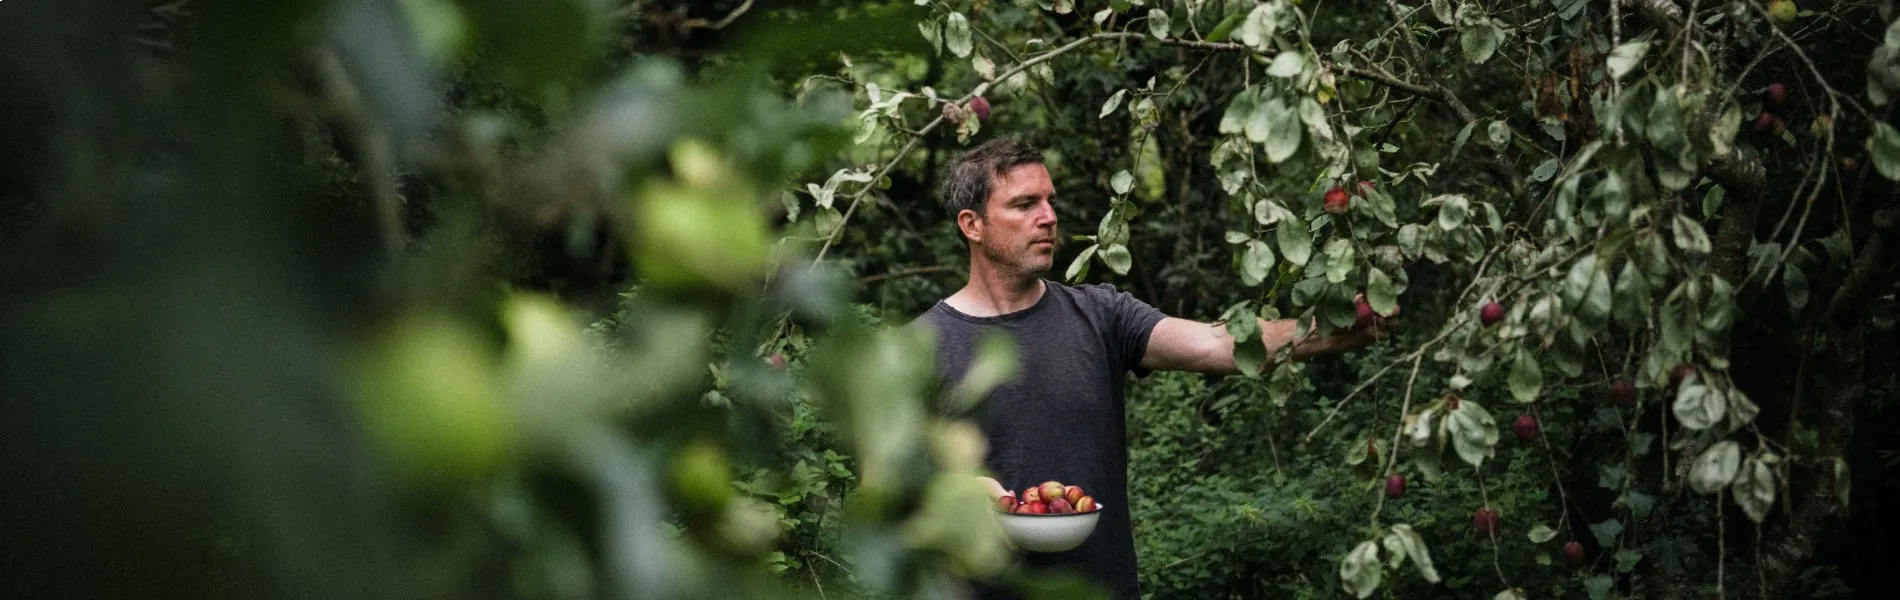 Gill picking plums in his garden